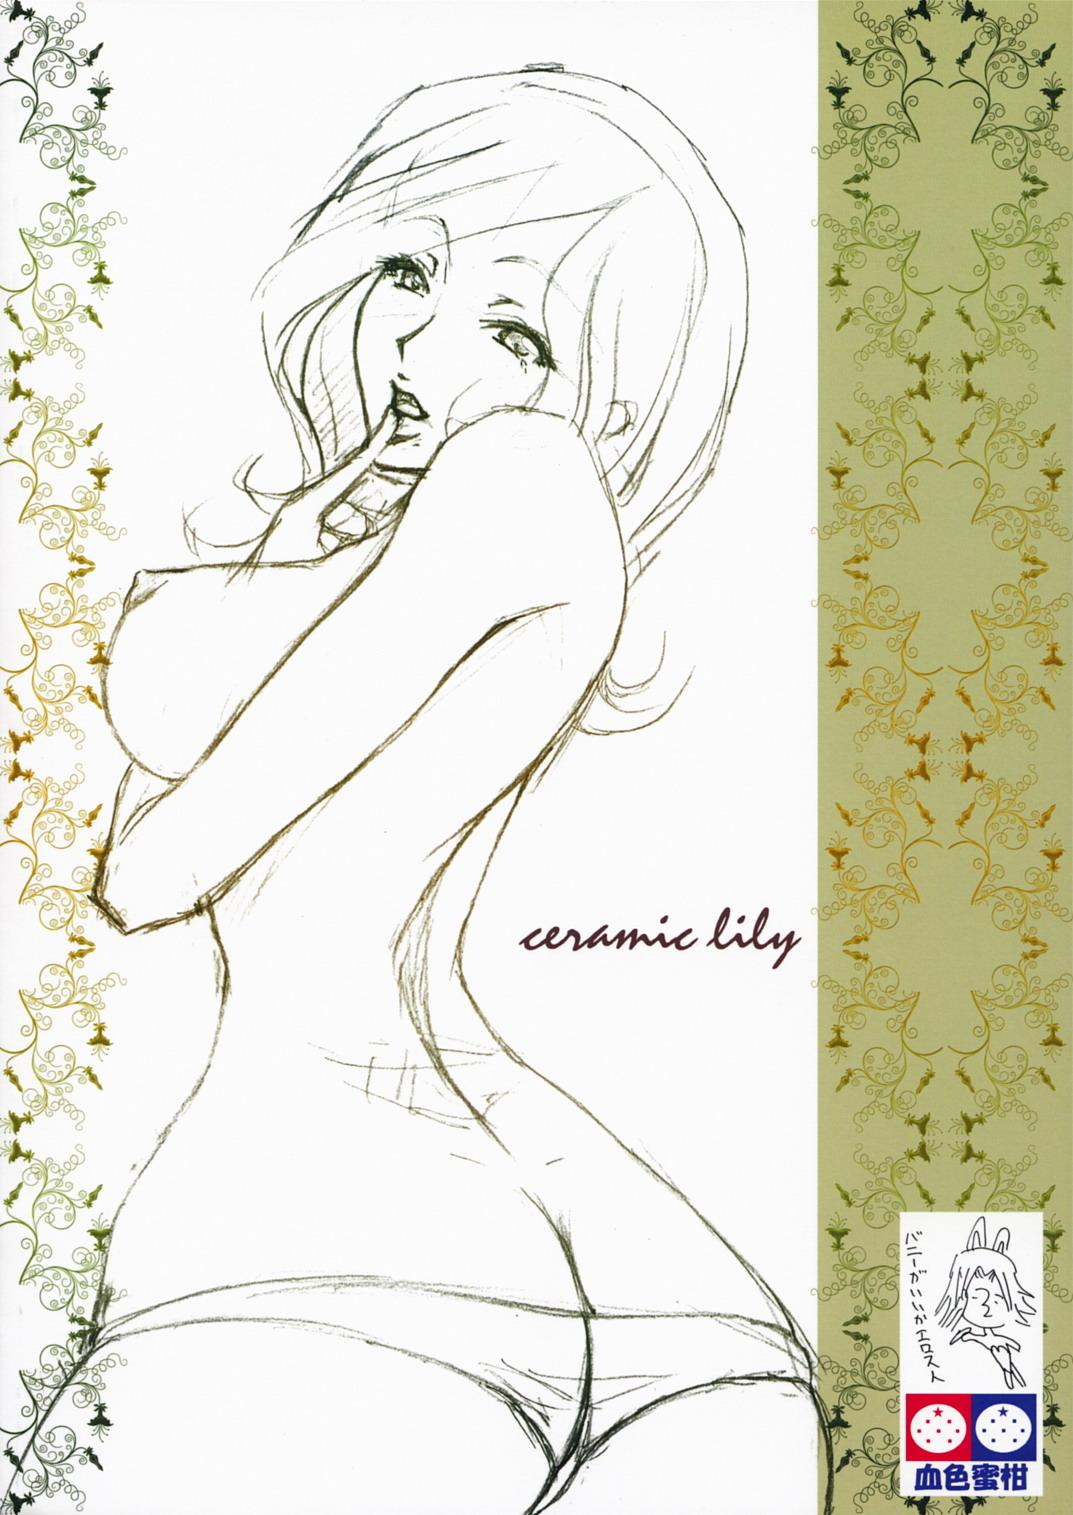 Negao CERAMIC LILY - Code geass Woman - Page 34